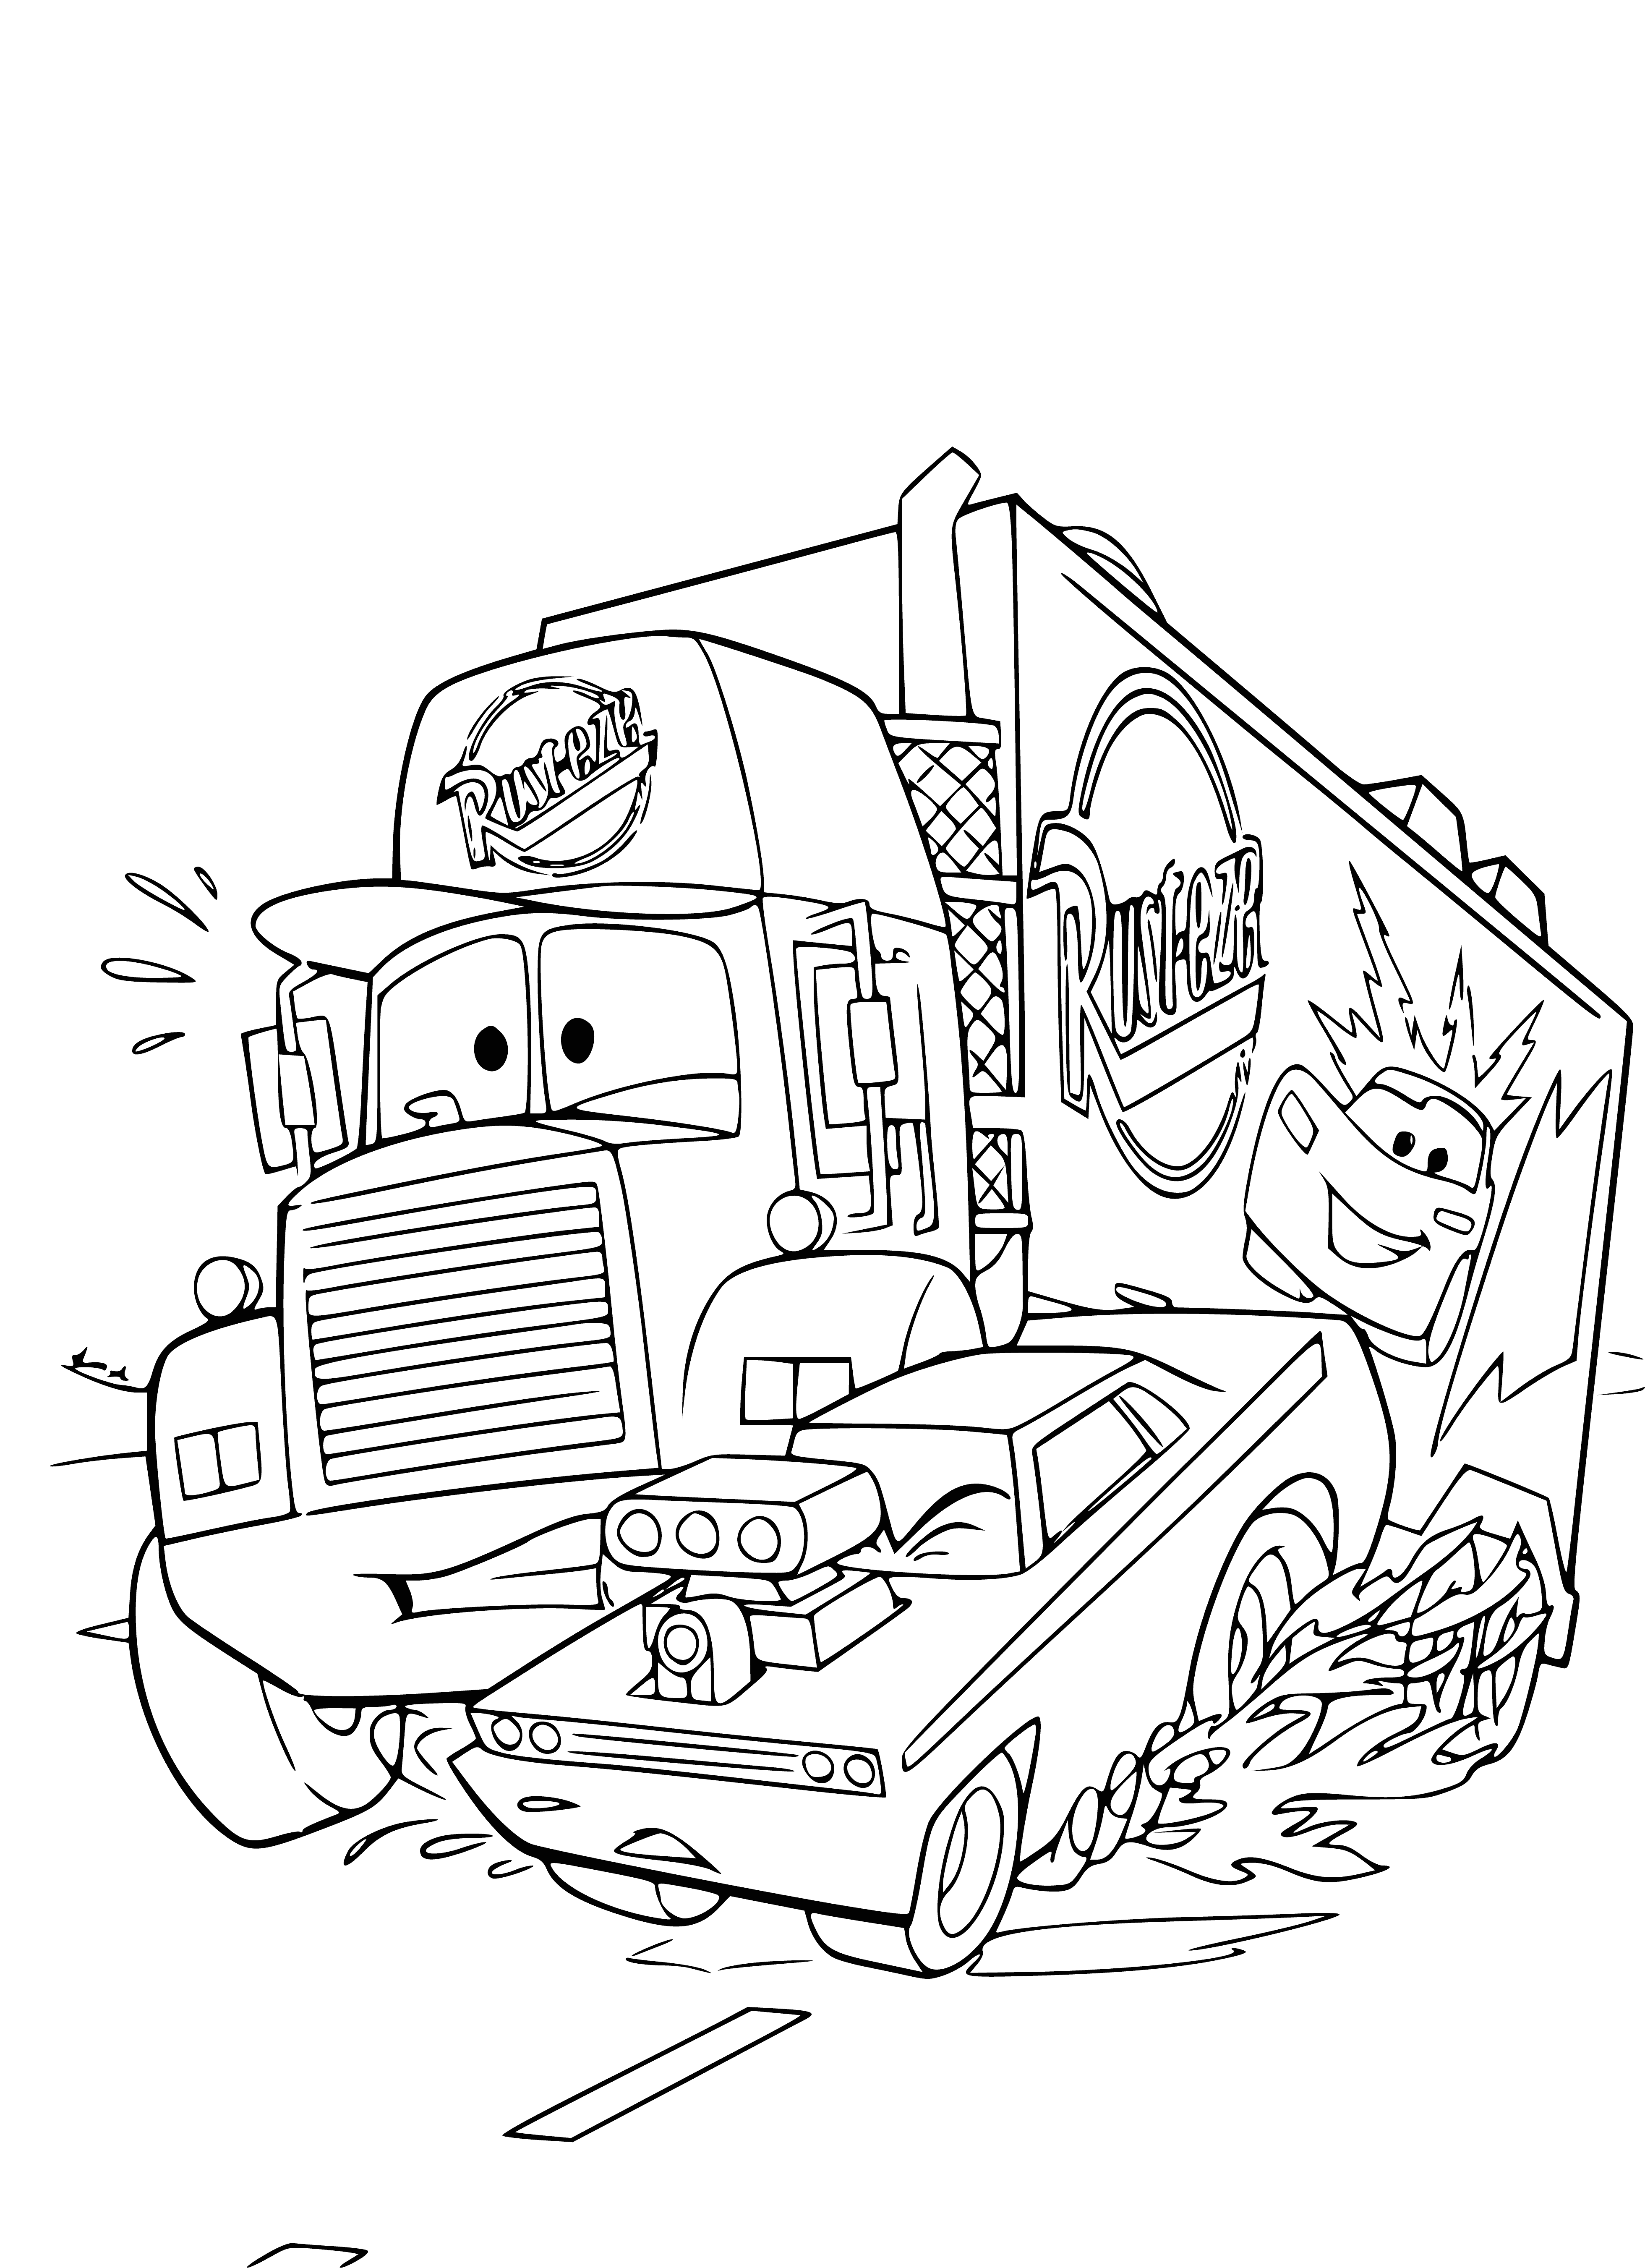 coloring page: Group gathered around car with open hood; man checking engine; others with beer; looks like party.